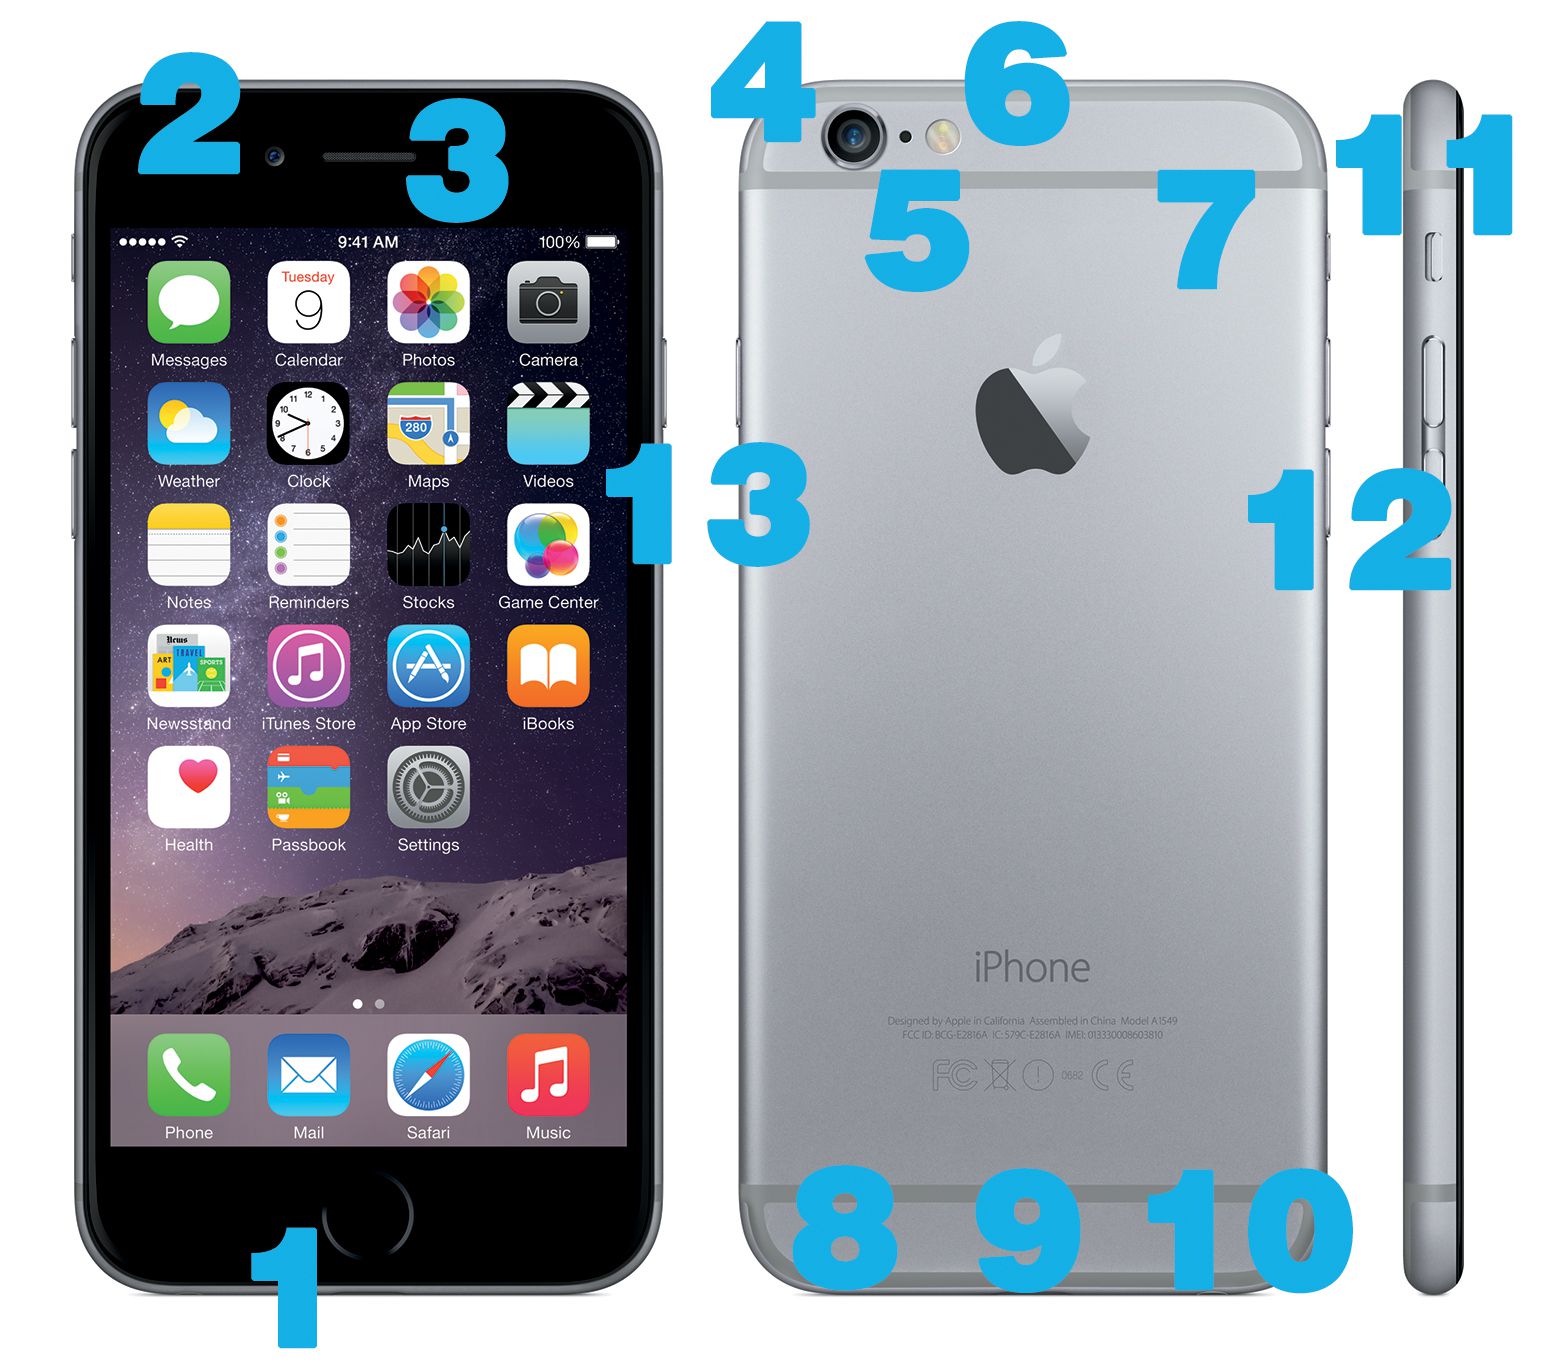 iphone diagram buttons of iPhone 6 Hardware iPhone Diagram and 6 Plus